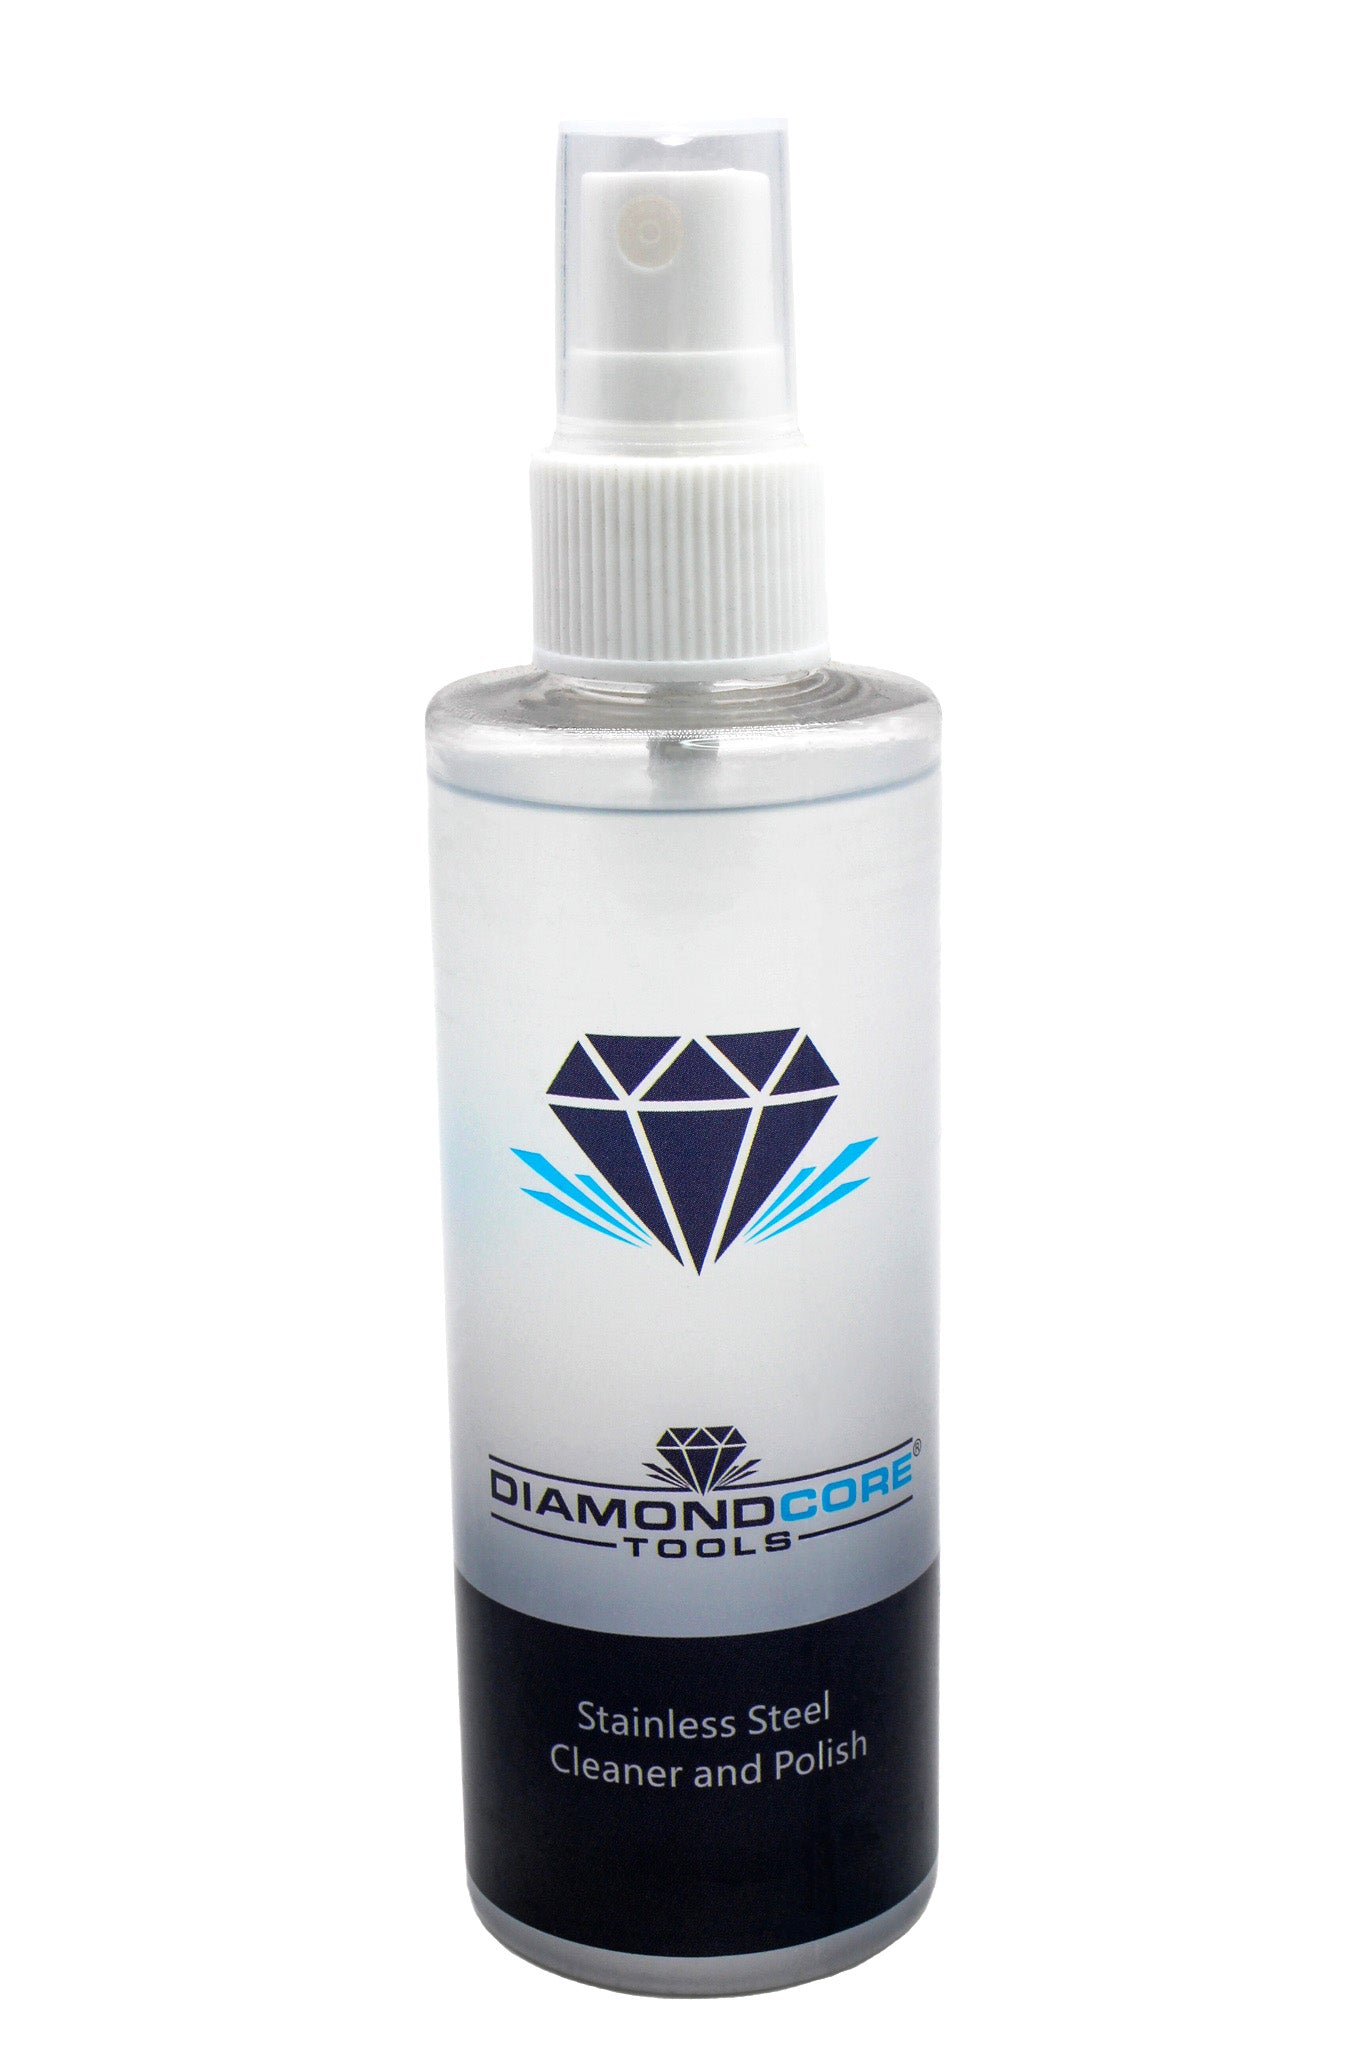 Stainless Steel Cleaner and Polish – DiamondCore Tools